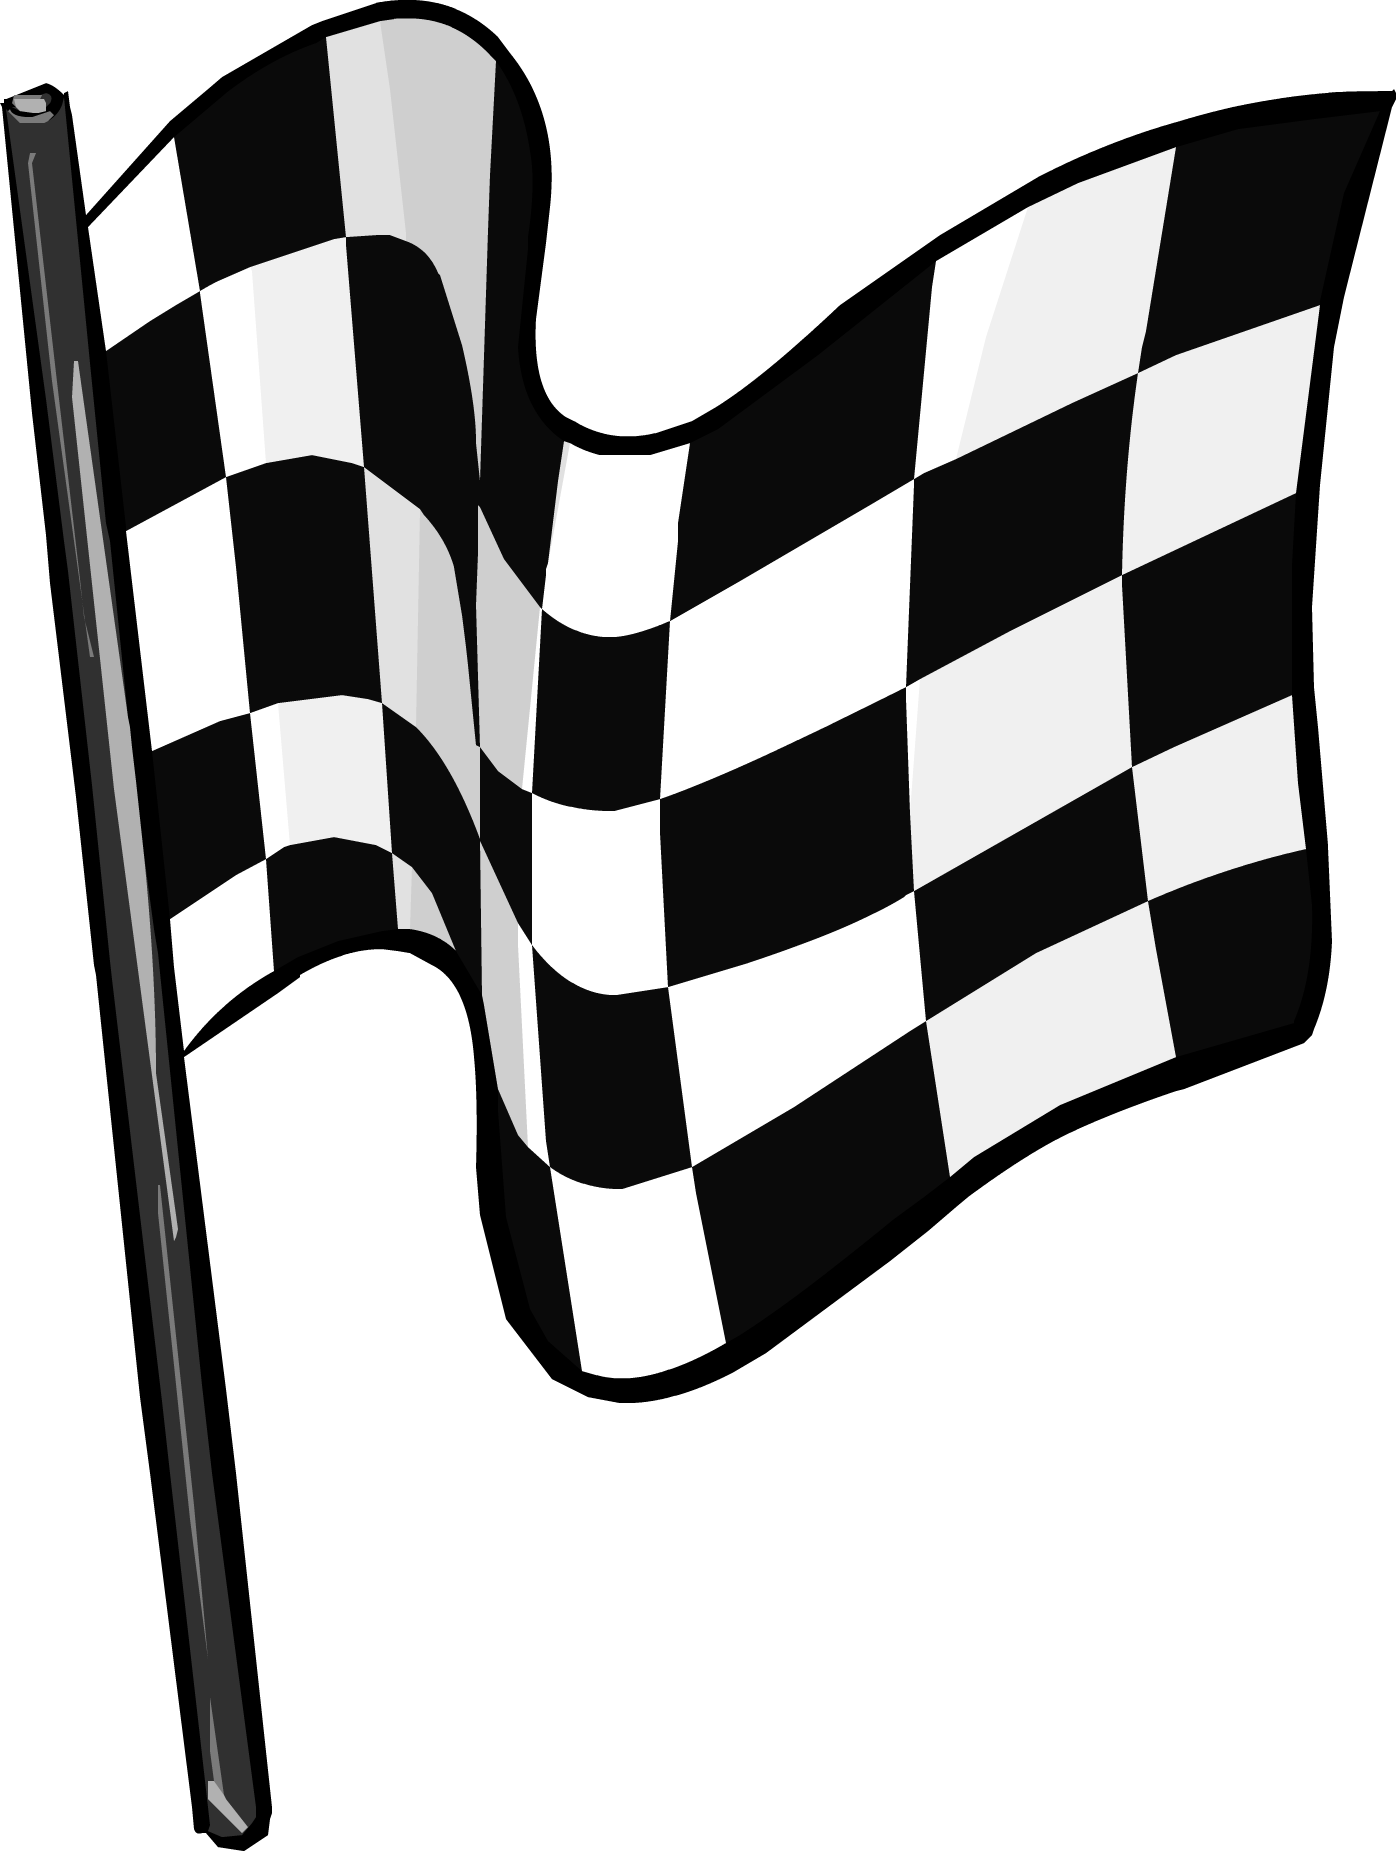 Free Checkered Flag Icon, Download Free Checkered Flag Icon png images